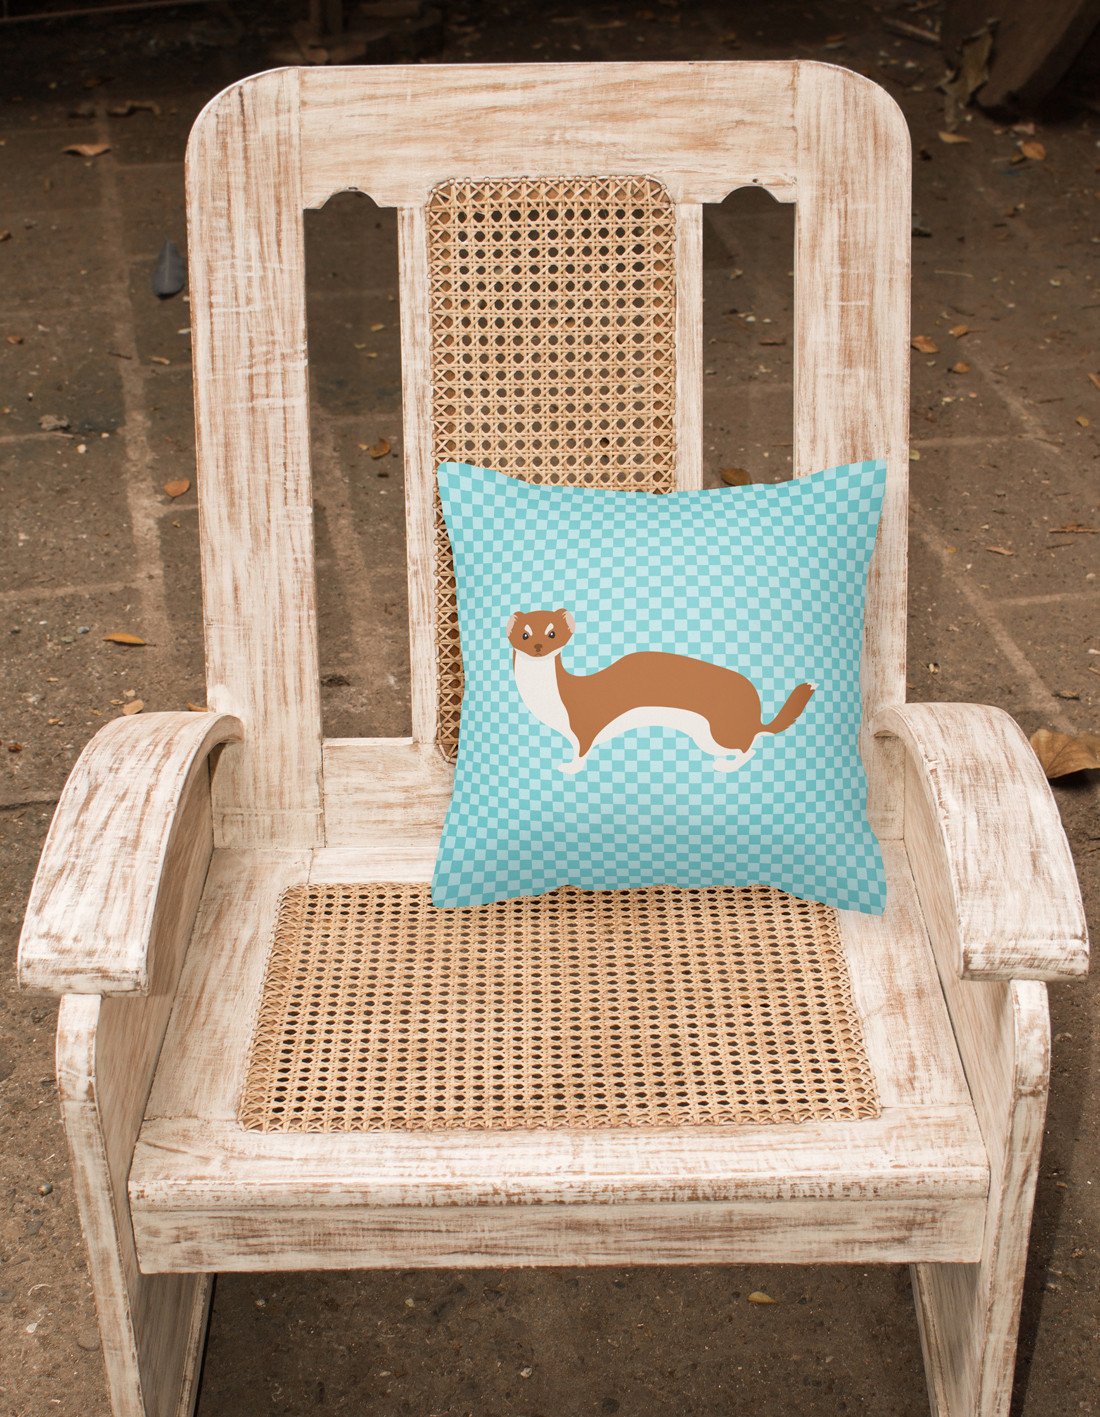 Weasel Blue Check Fabric Decorative Pillow BB8044PW1818 by Caroline's Treasures